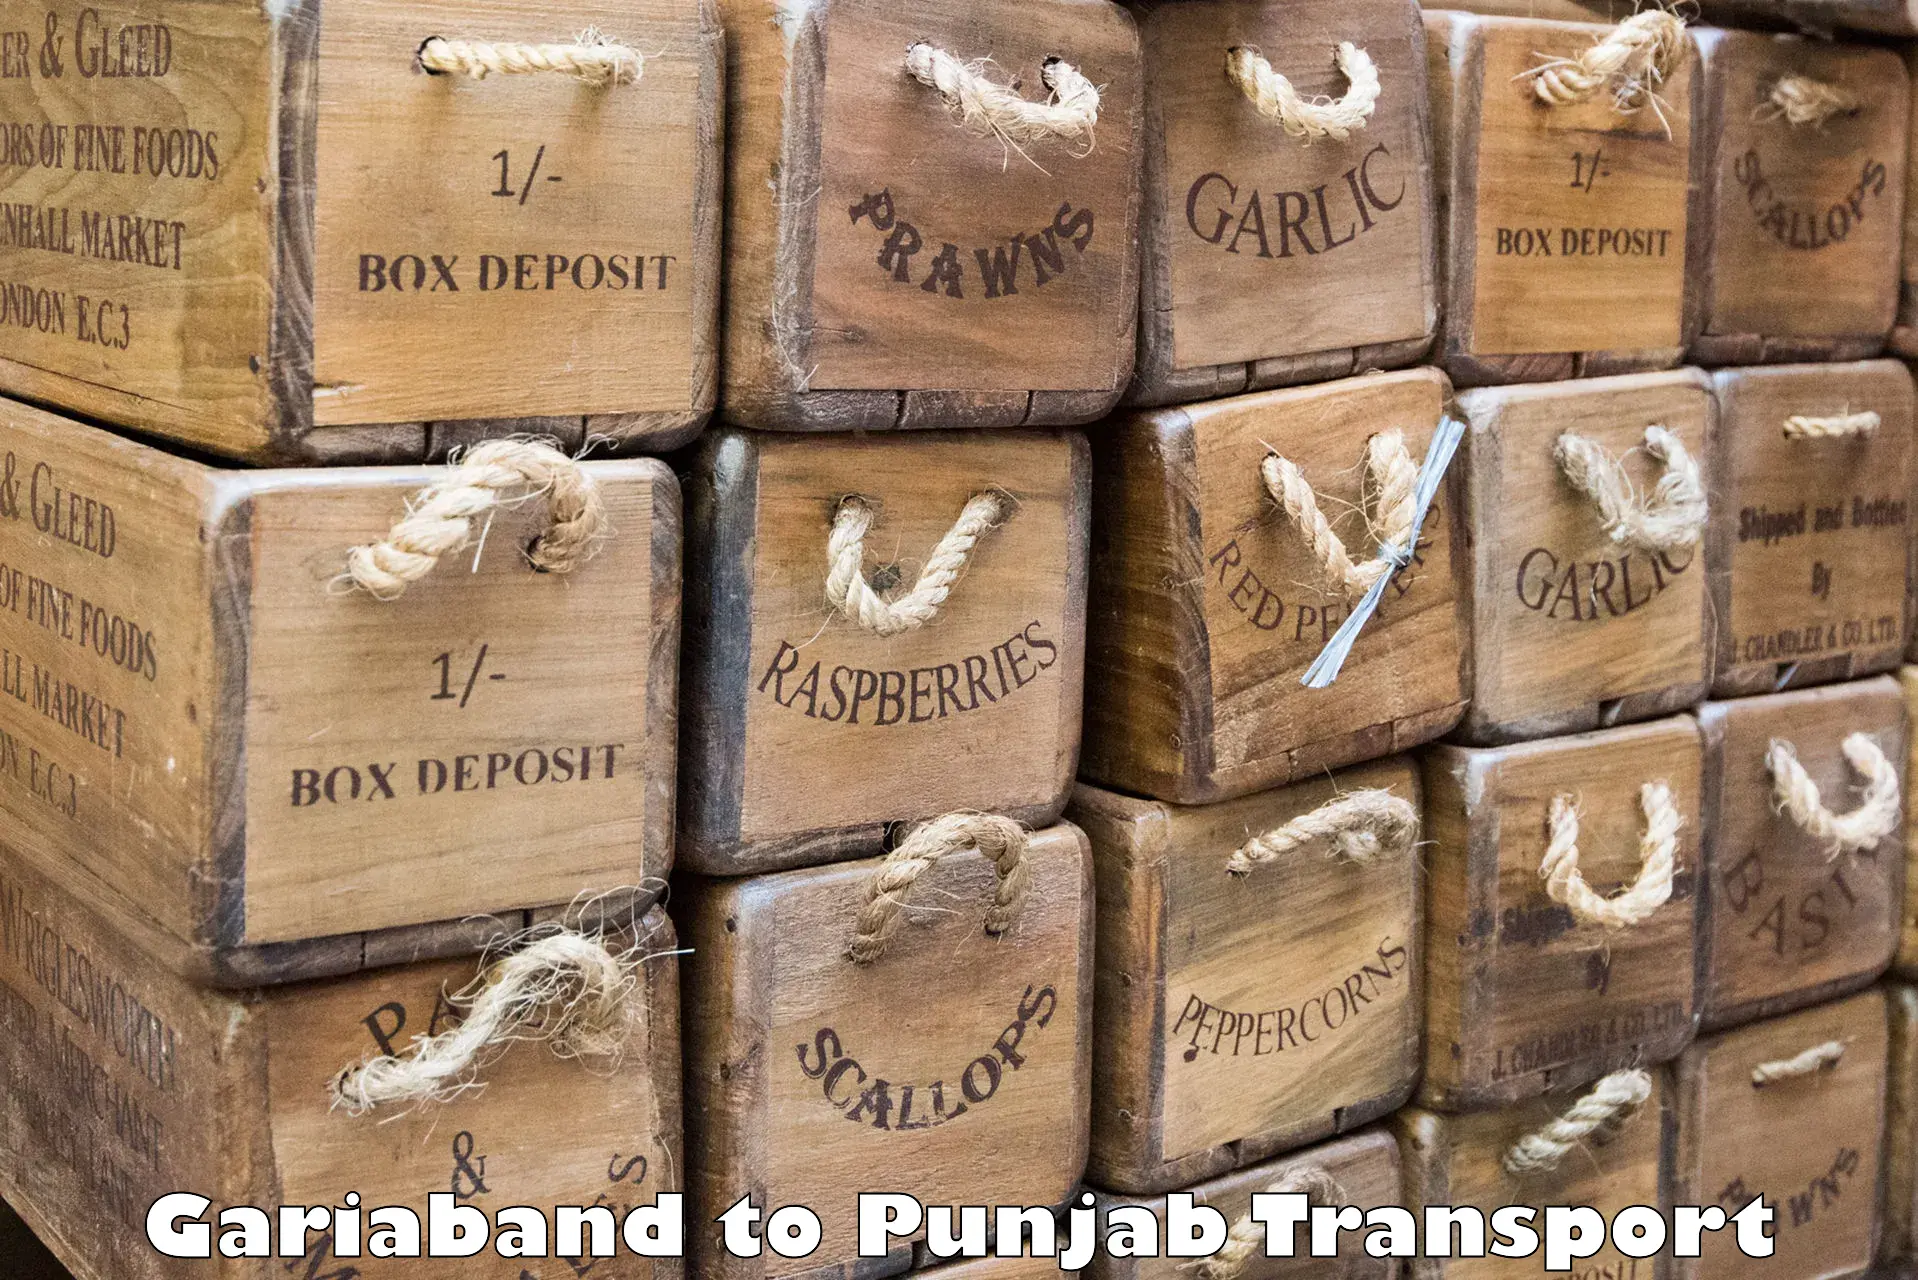 Express transport services Gariaband to Punjab Agricultural University Ludhiana